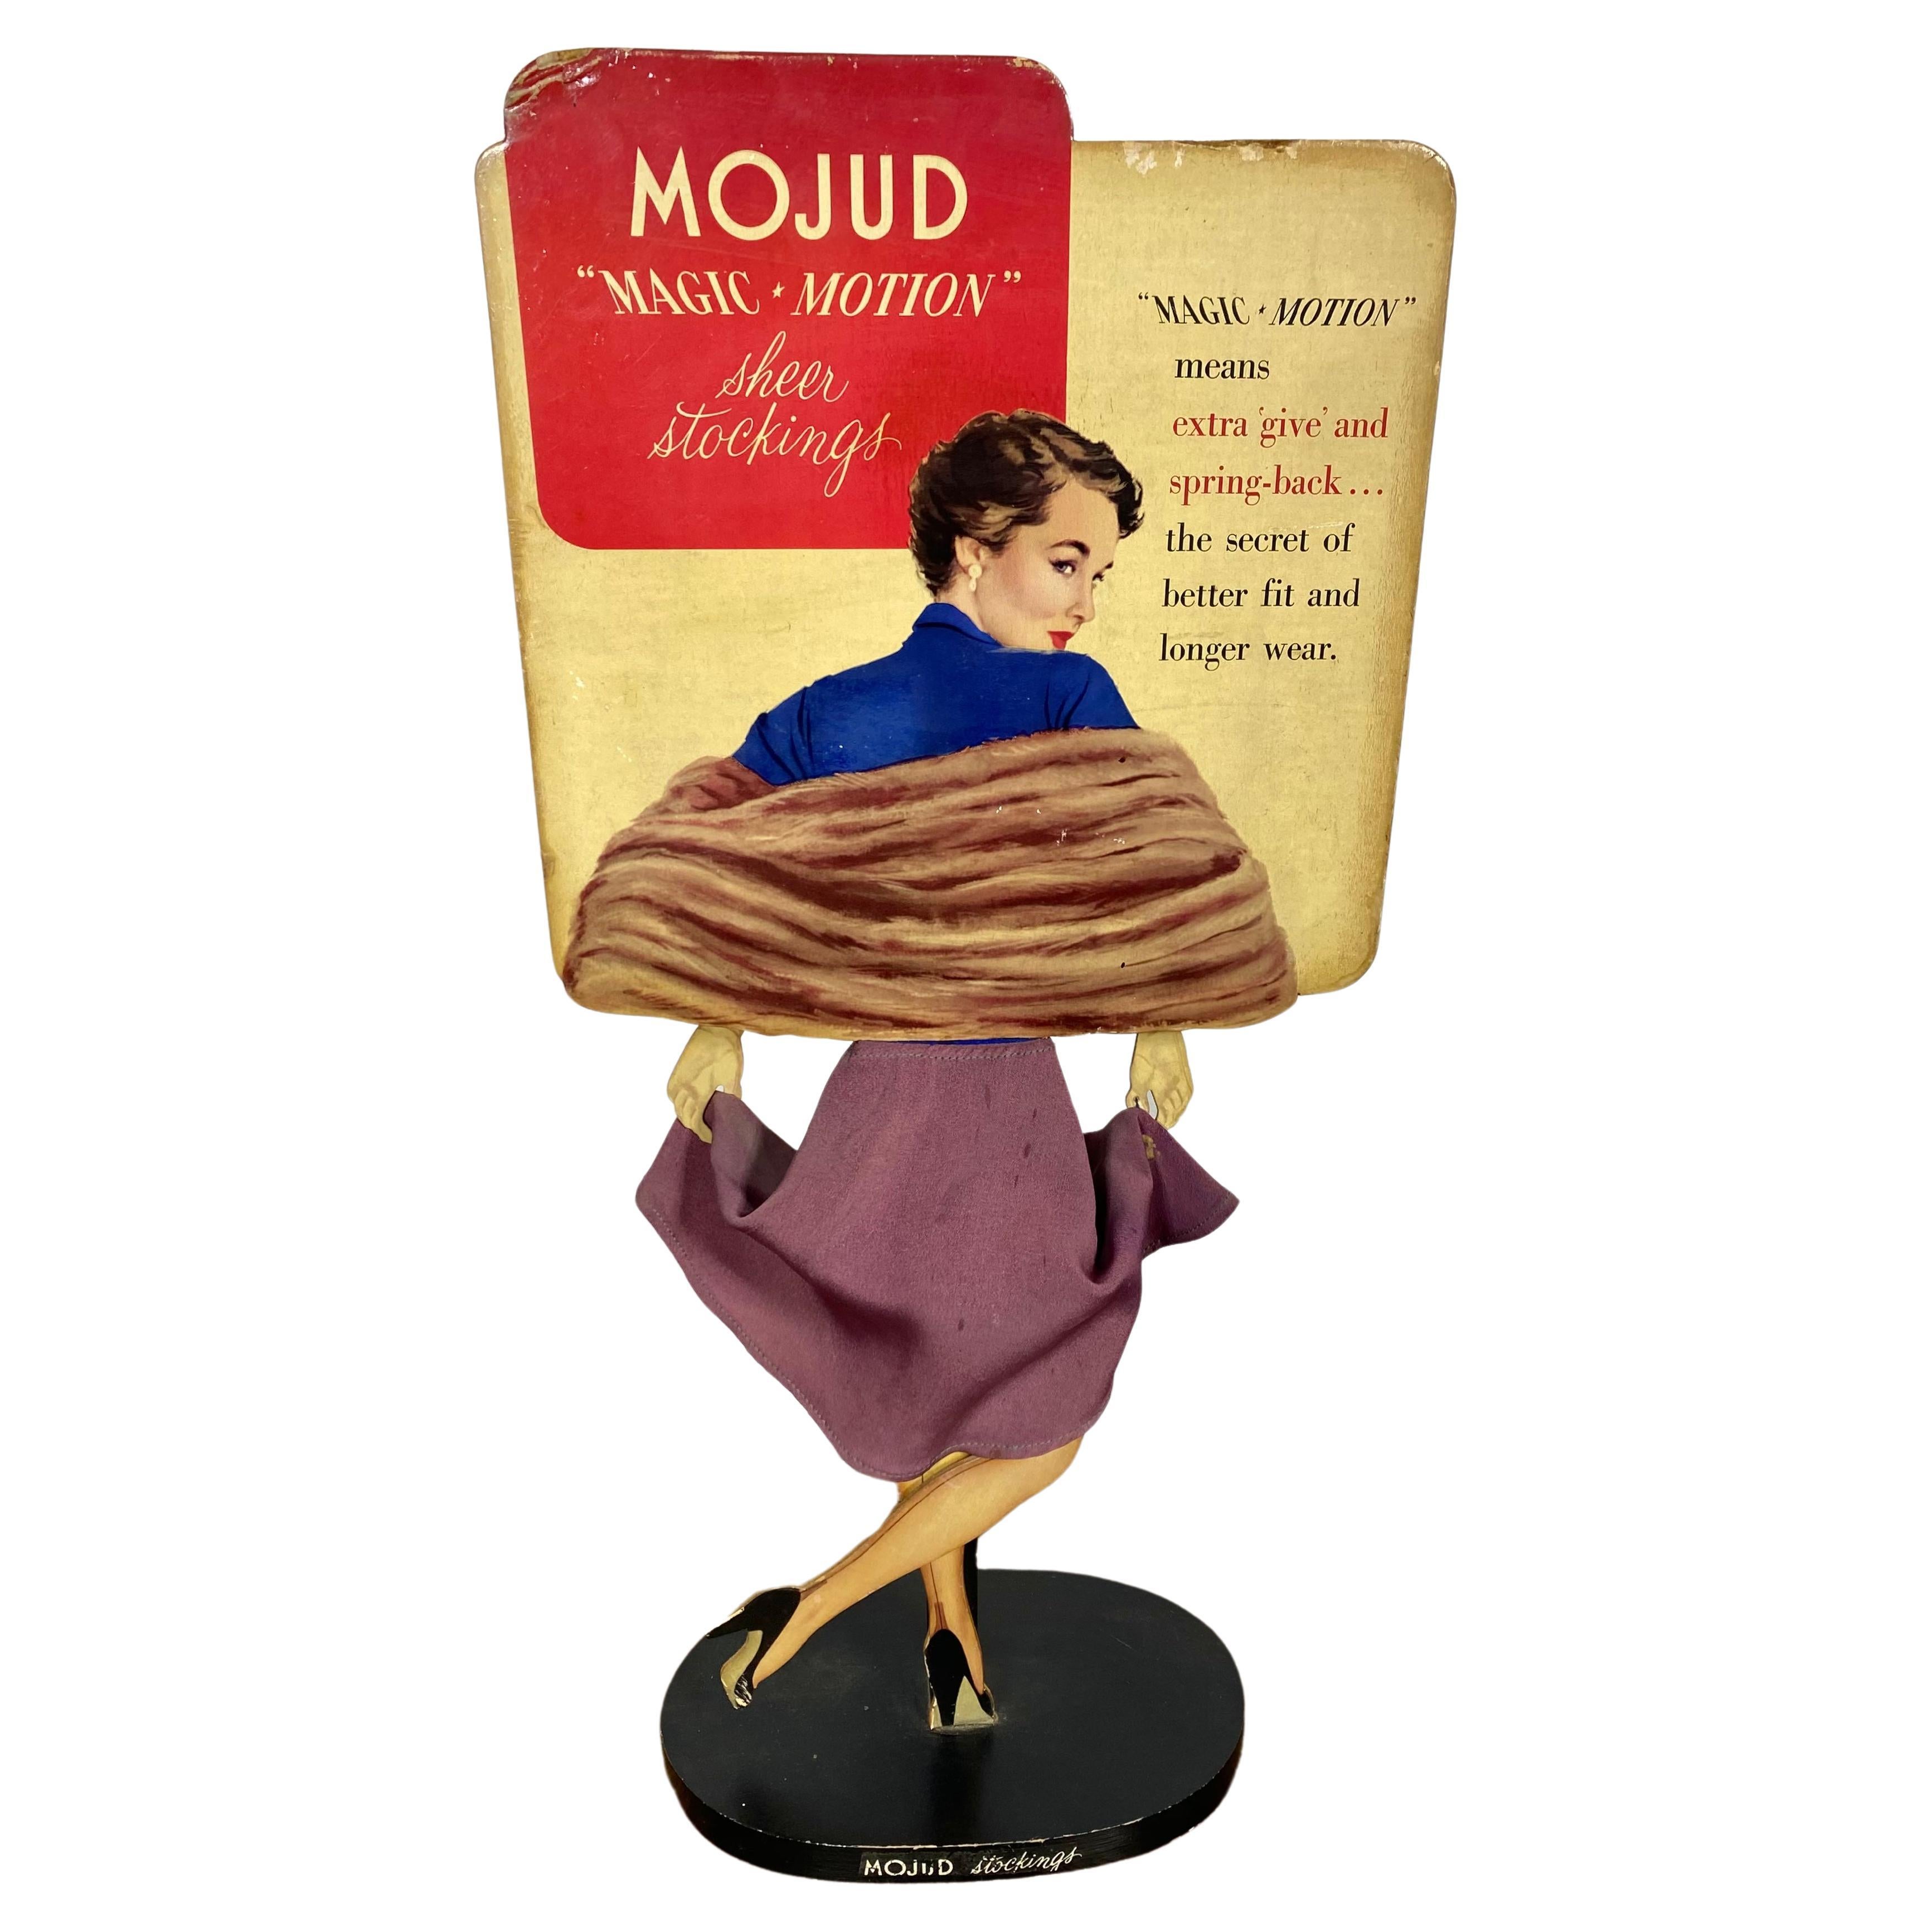 Rare Mechanical Store Display "MOJUD" Stockings by Louis G. Audette & Company For Sale